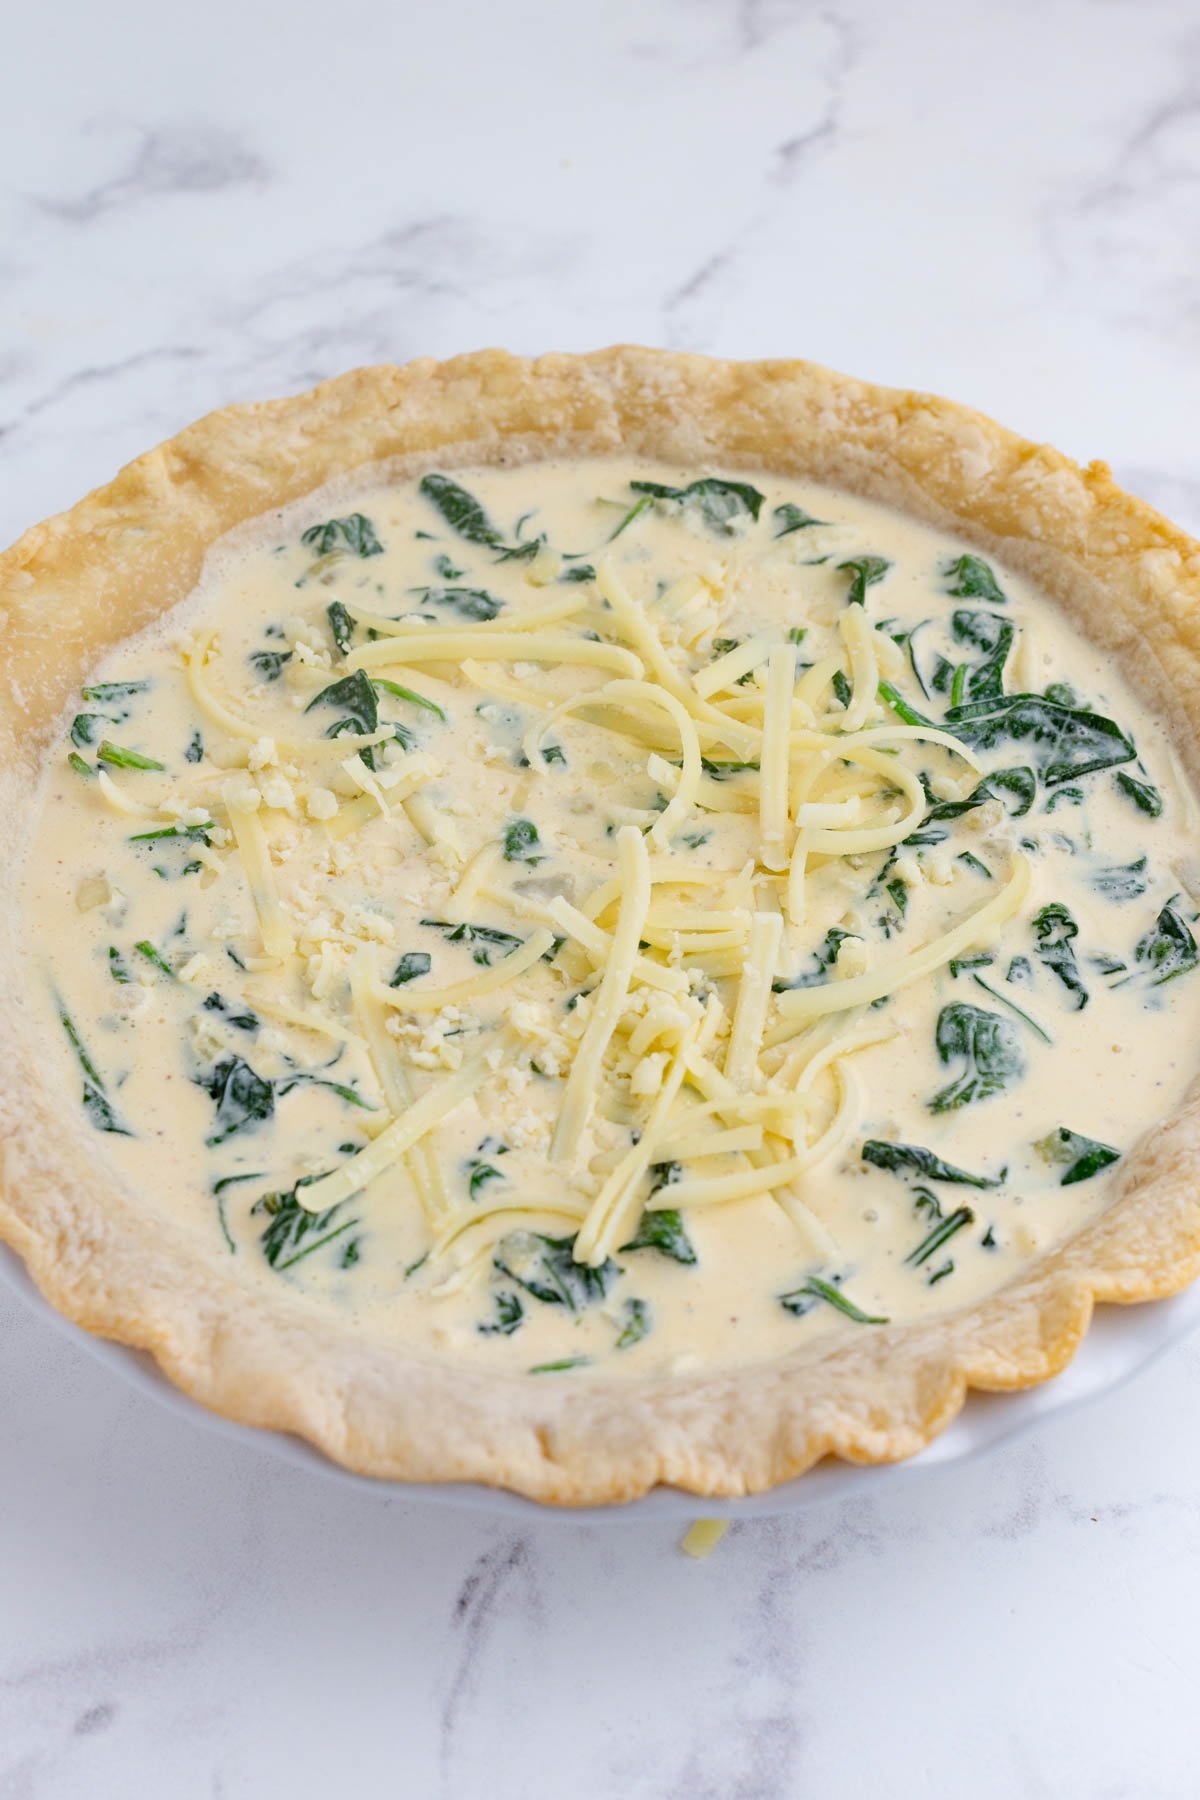 Cheese is sprinkled on to of the quiche.